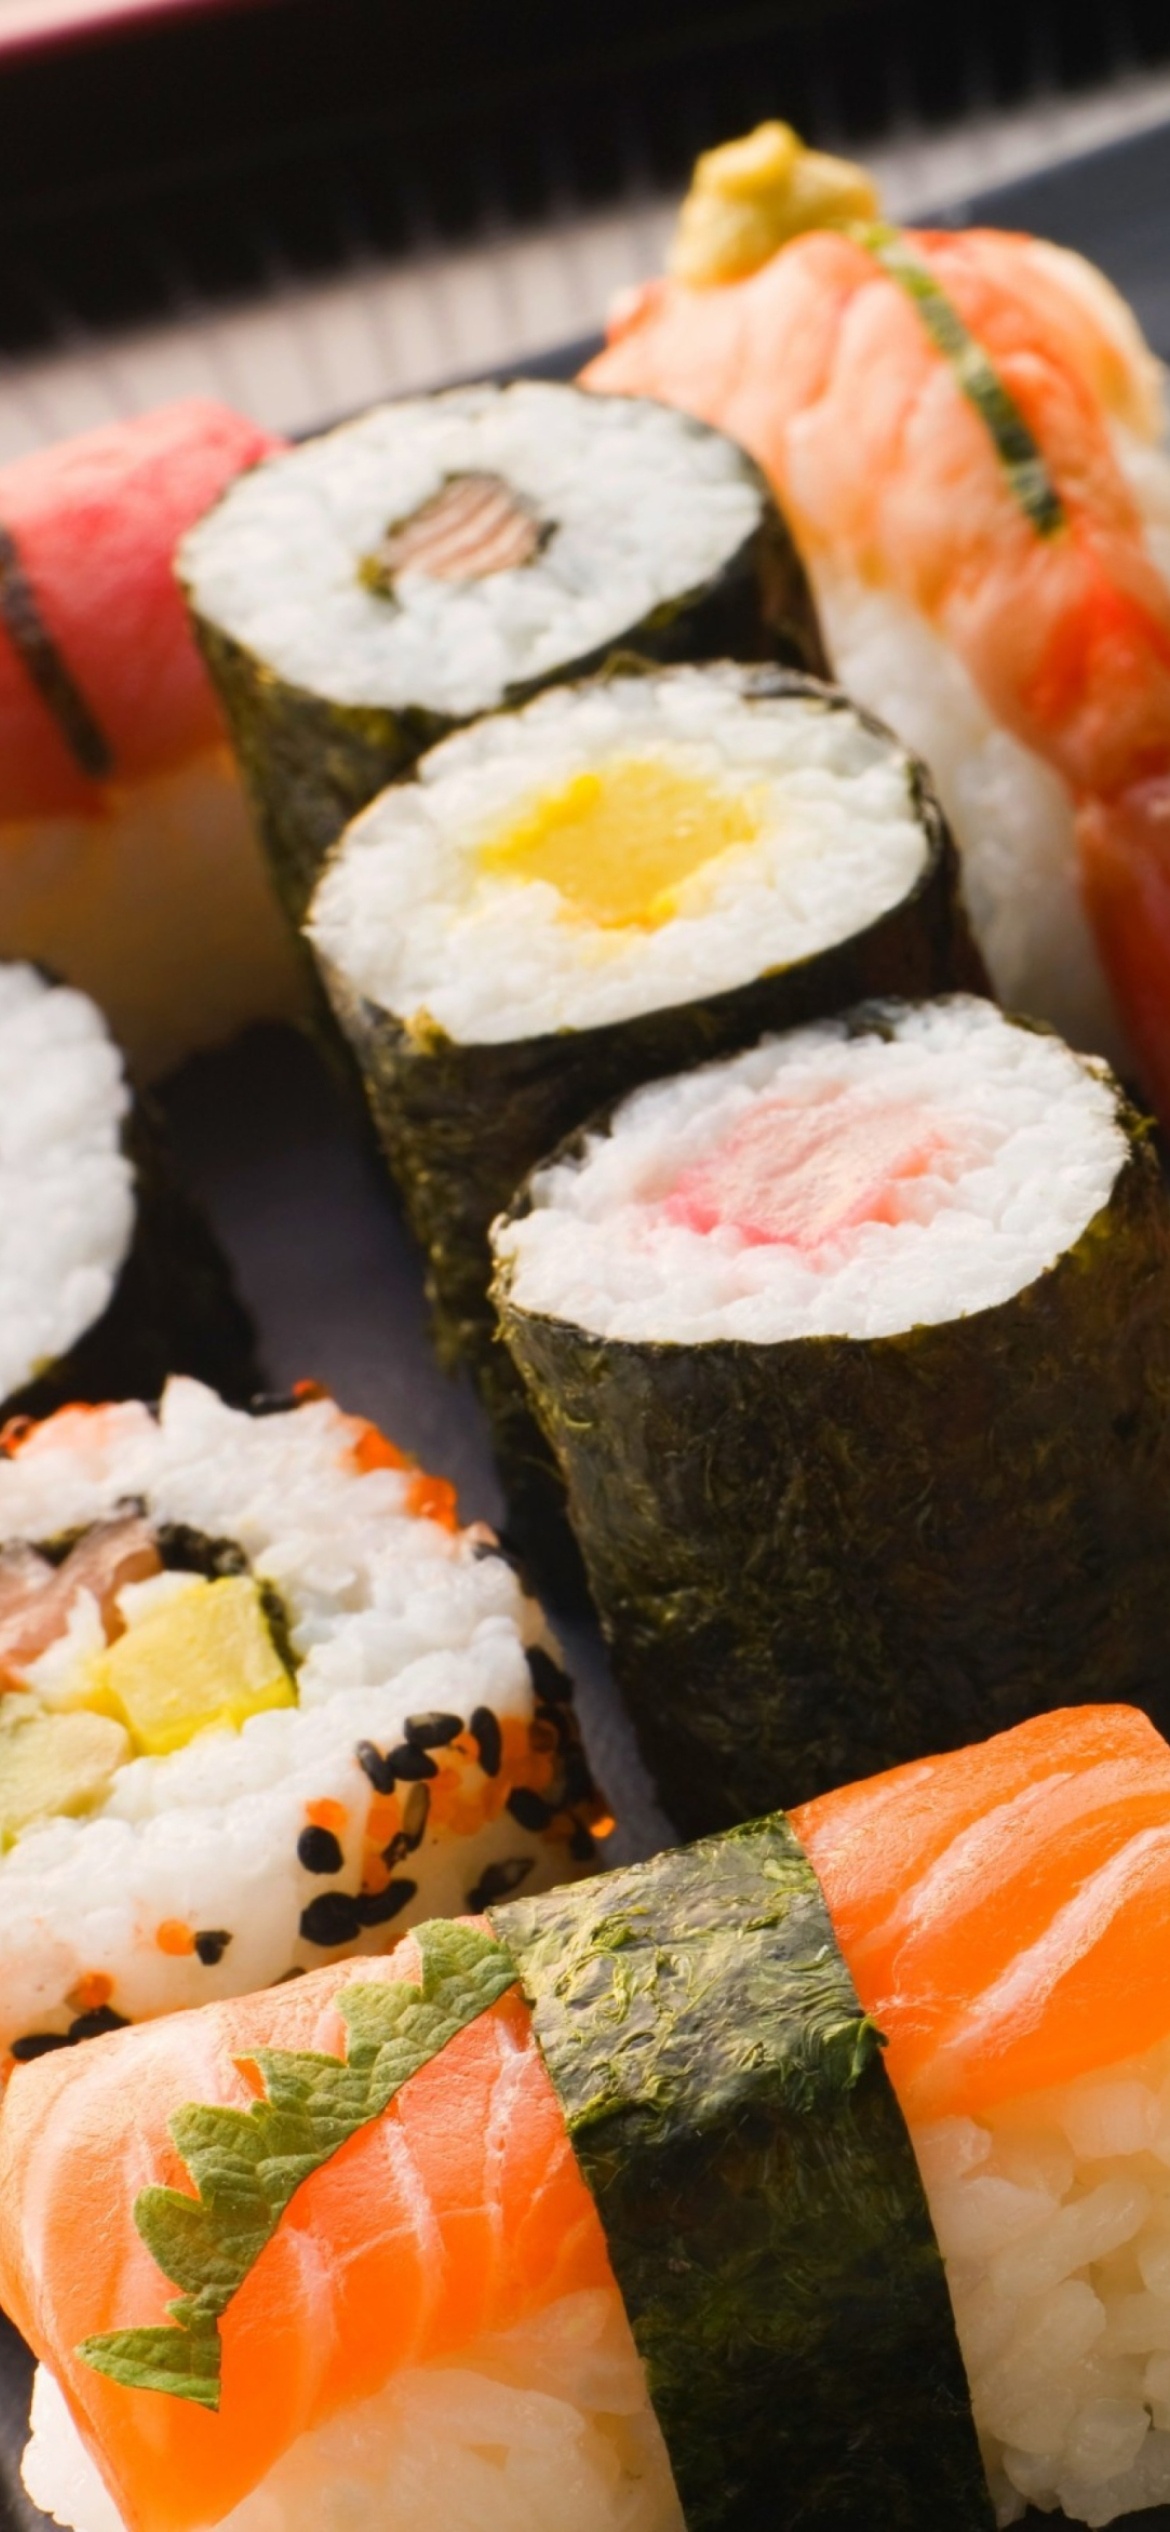 Sushi: A finger-size piece of raw fish or shellfish on a bed of rice. 1170x2540 HD Background.